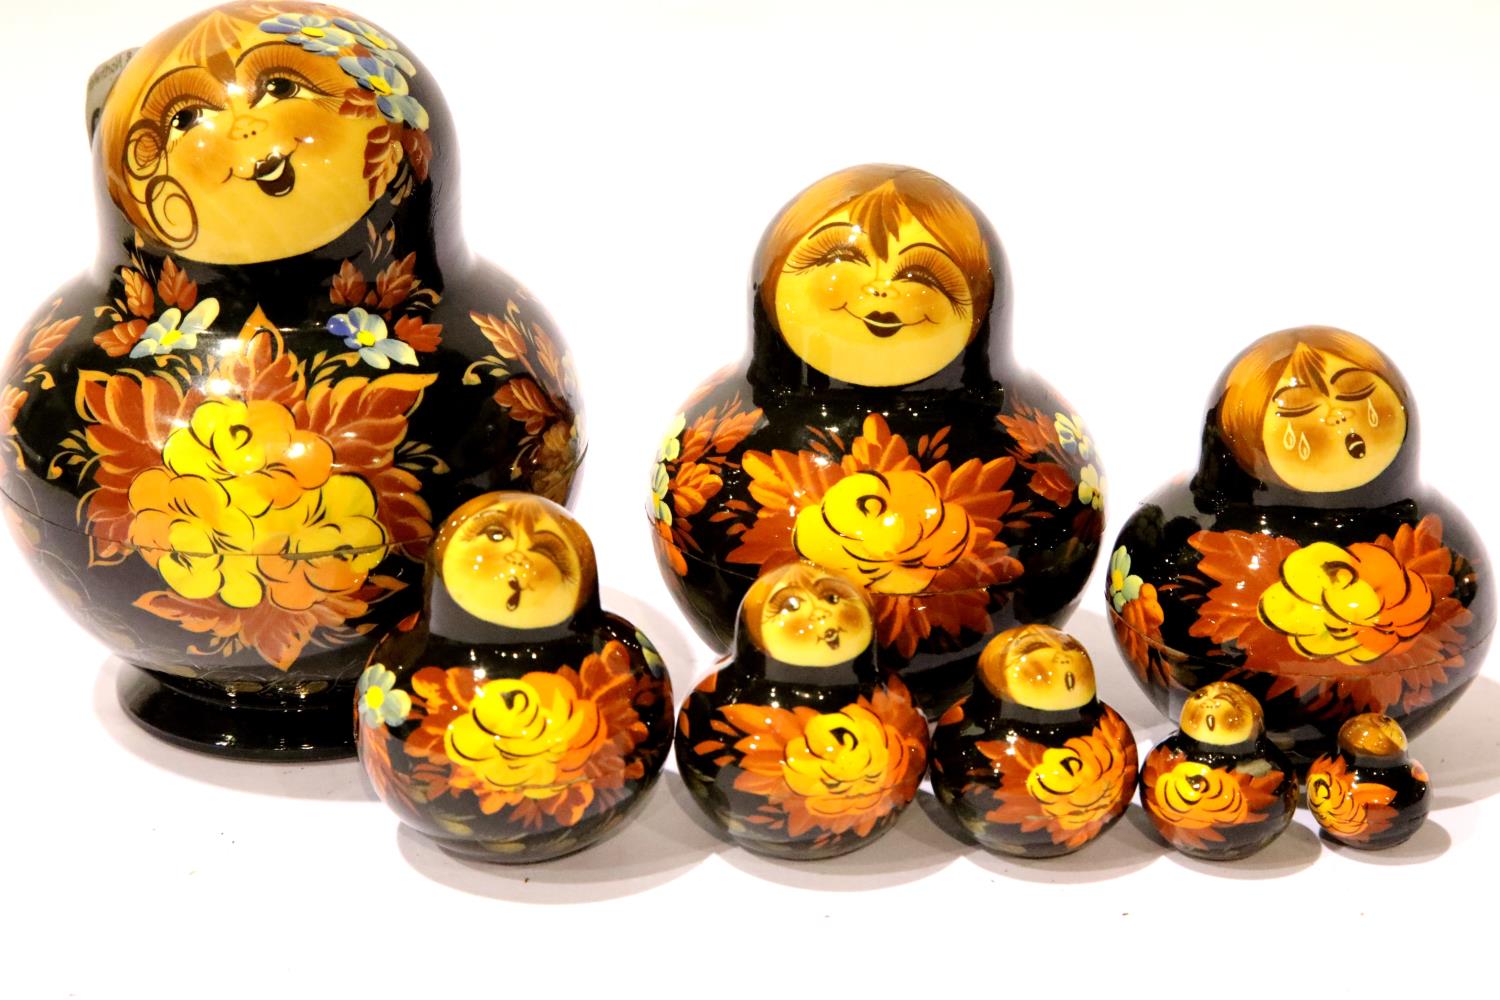 Russian nesting doll, ten doll set. P&P Group 1 (£14+VAT for the first lot and £1+VAT for subsequent